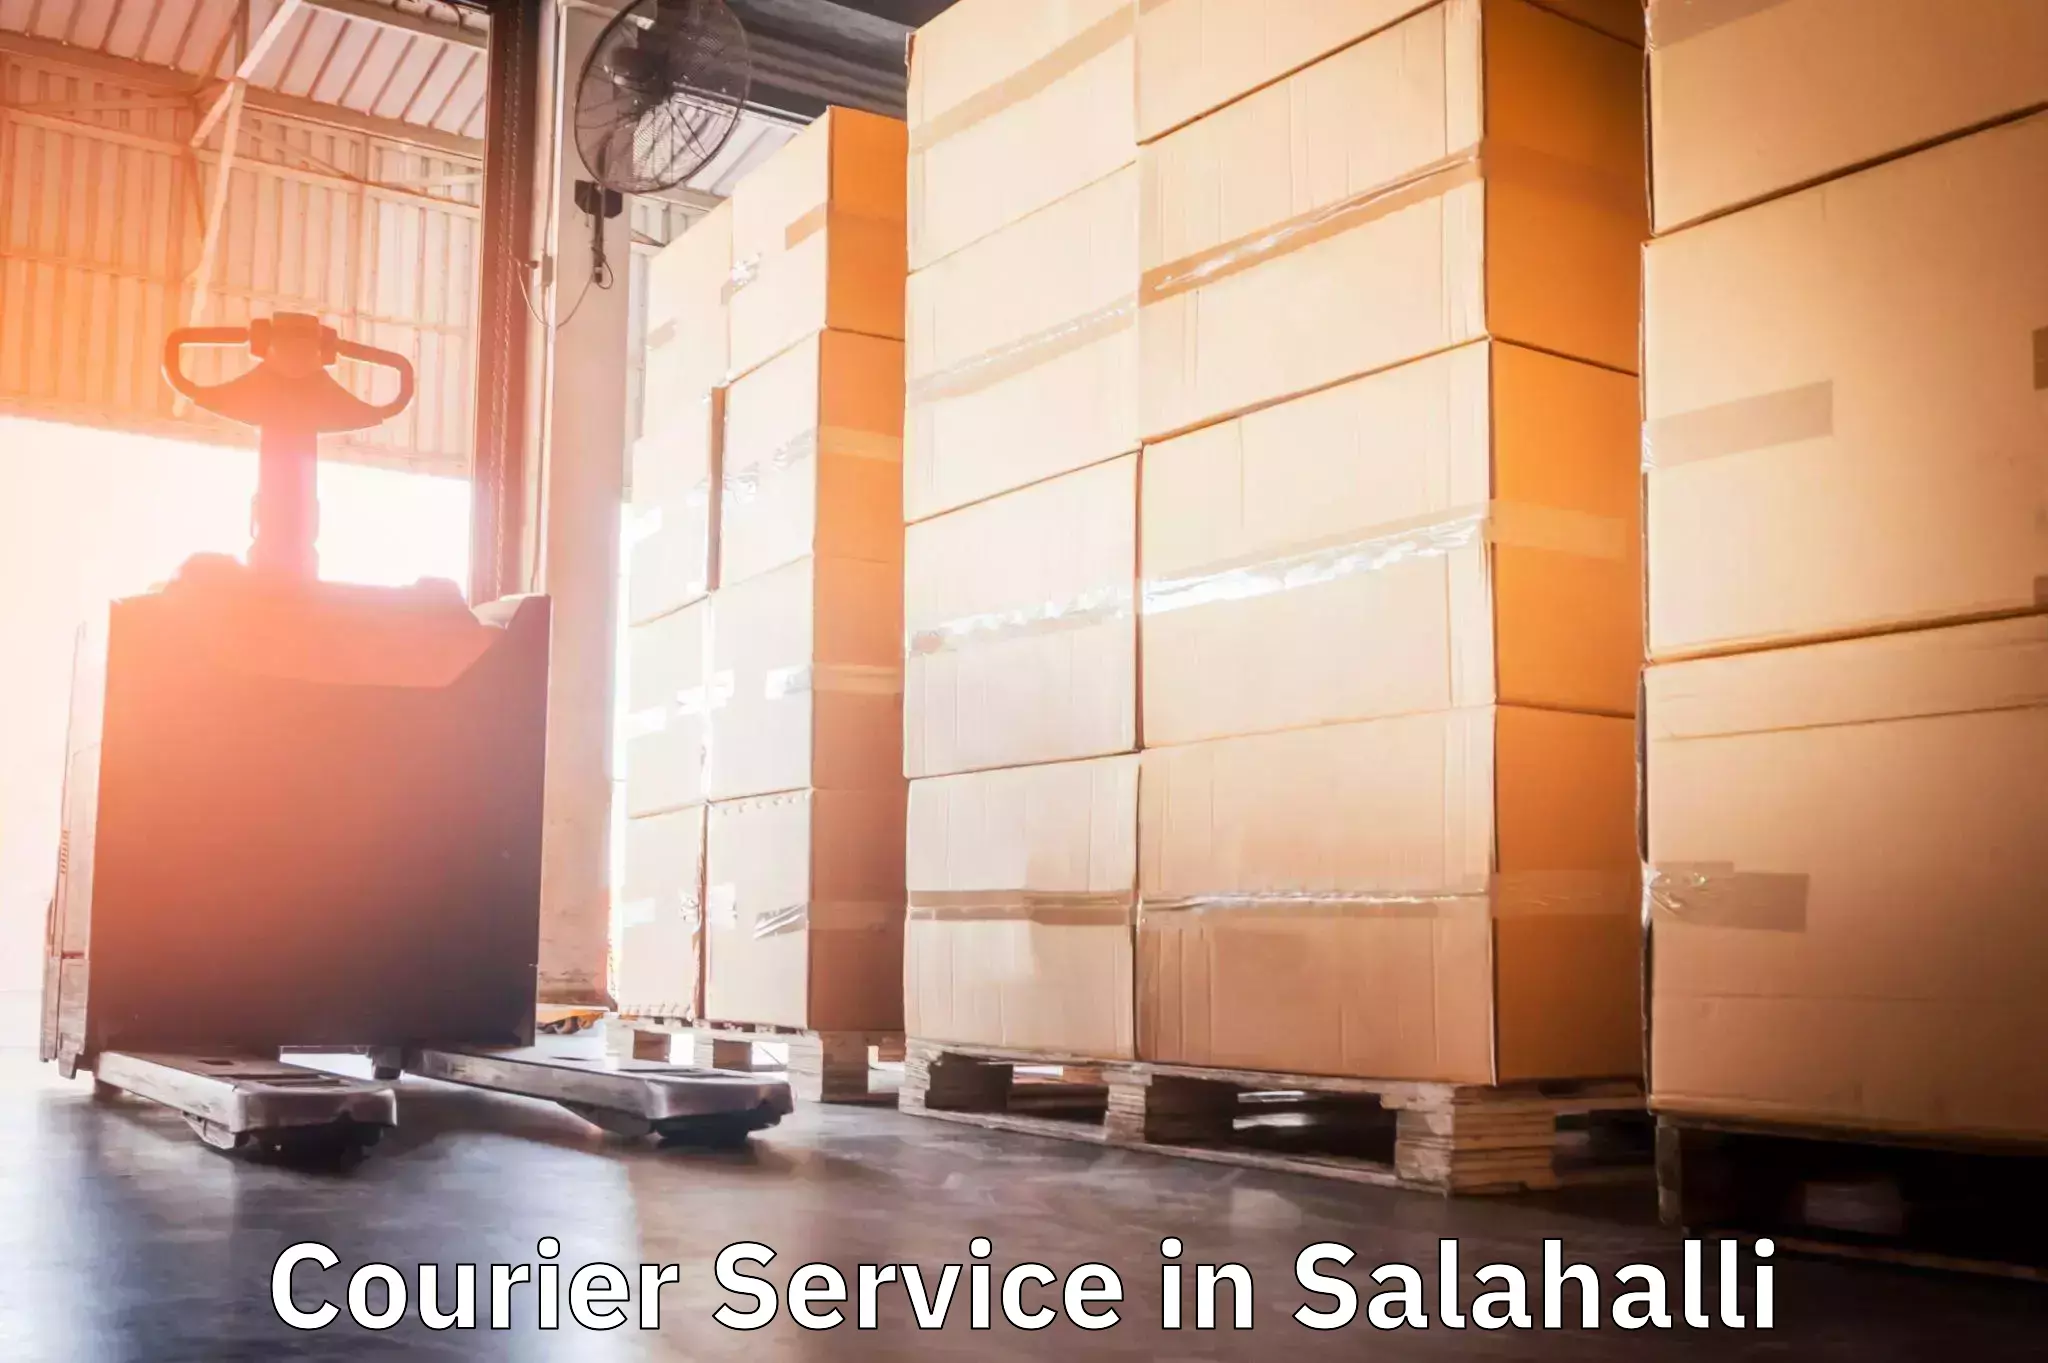 State-of-the-art courier technology in Salahalli